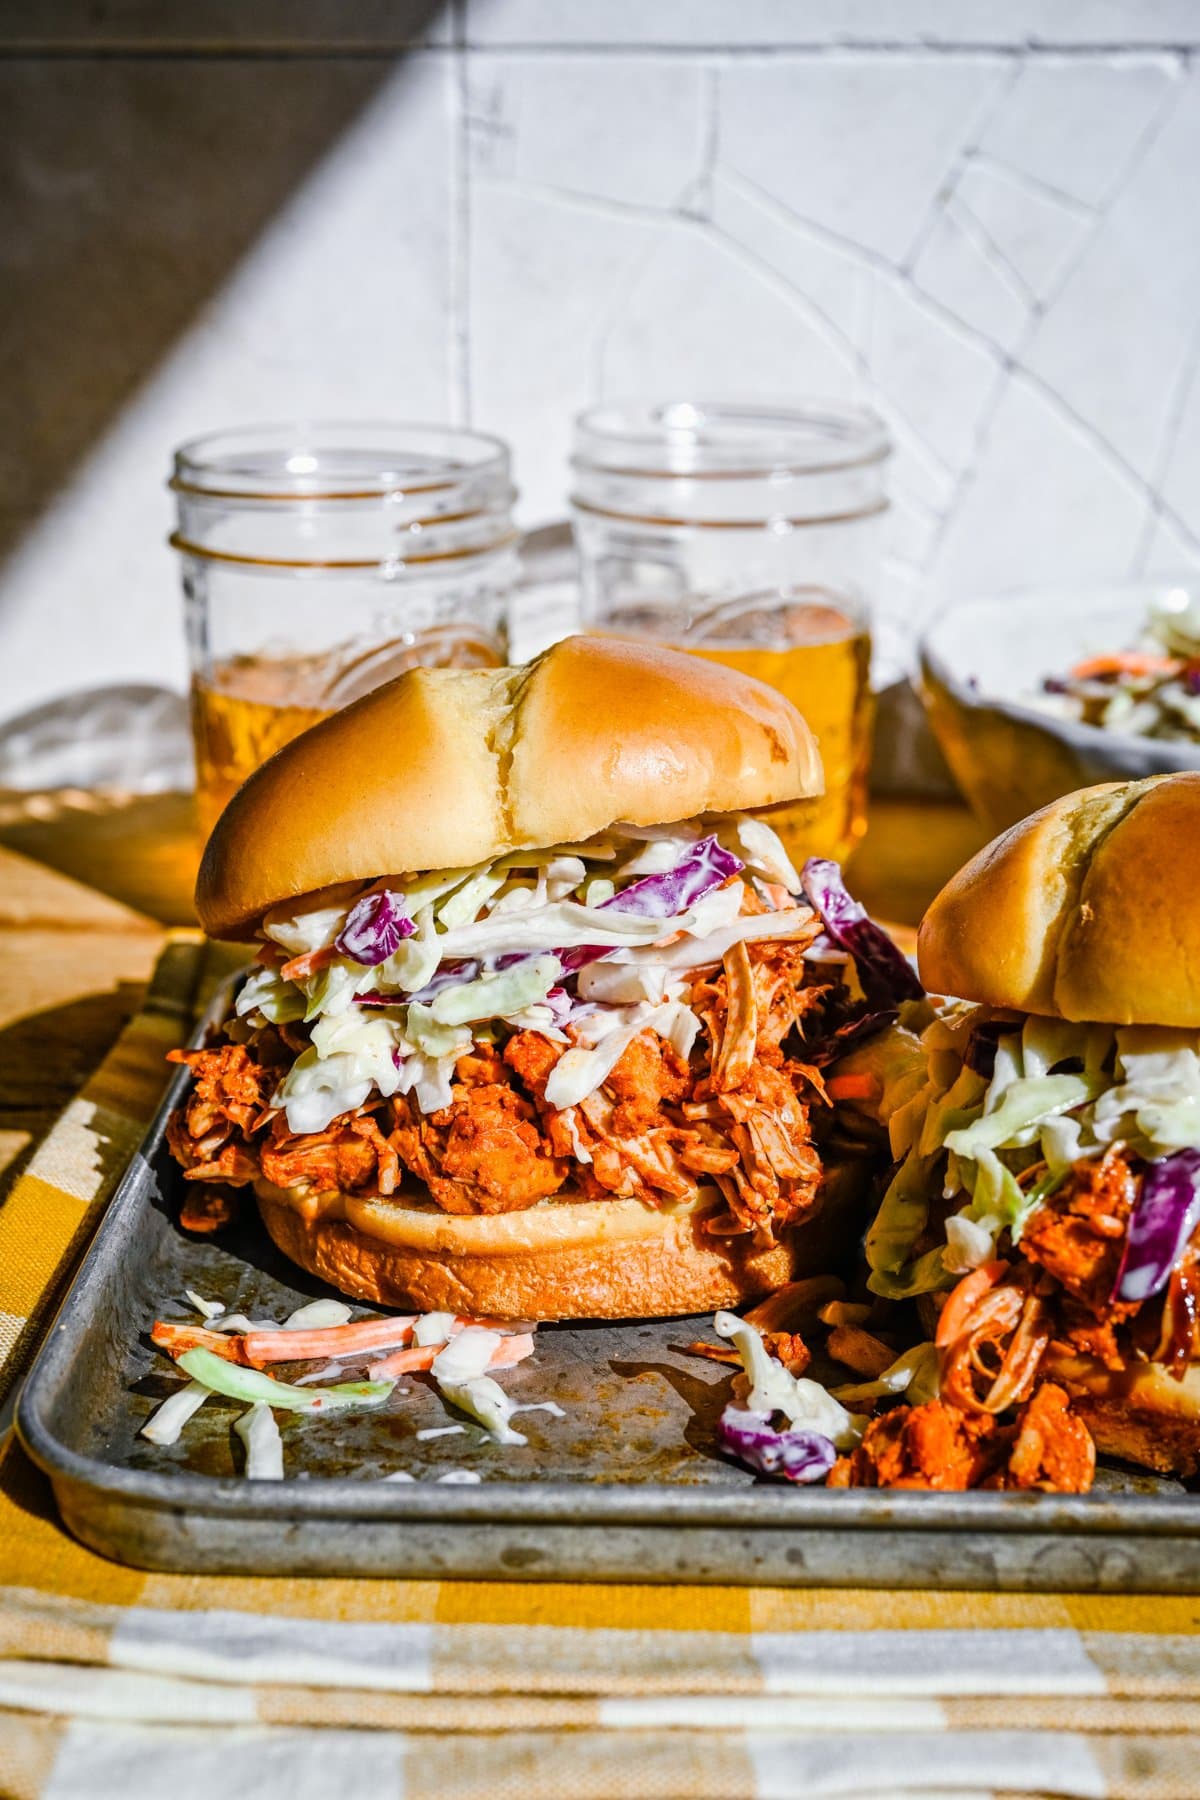 Pulled jackfruit burger on a metal tray.